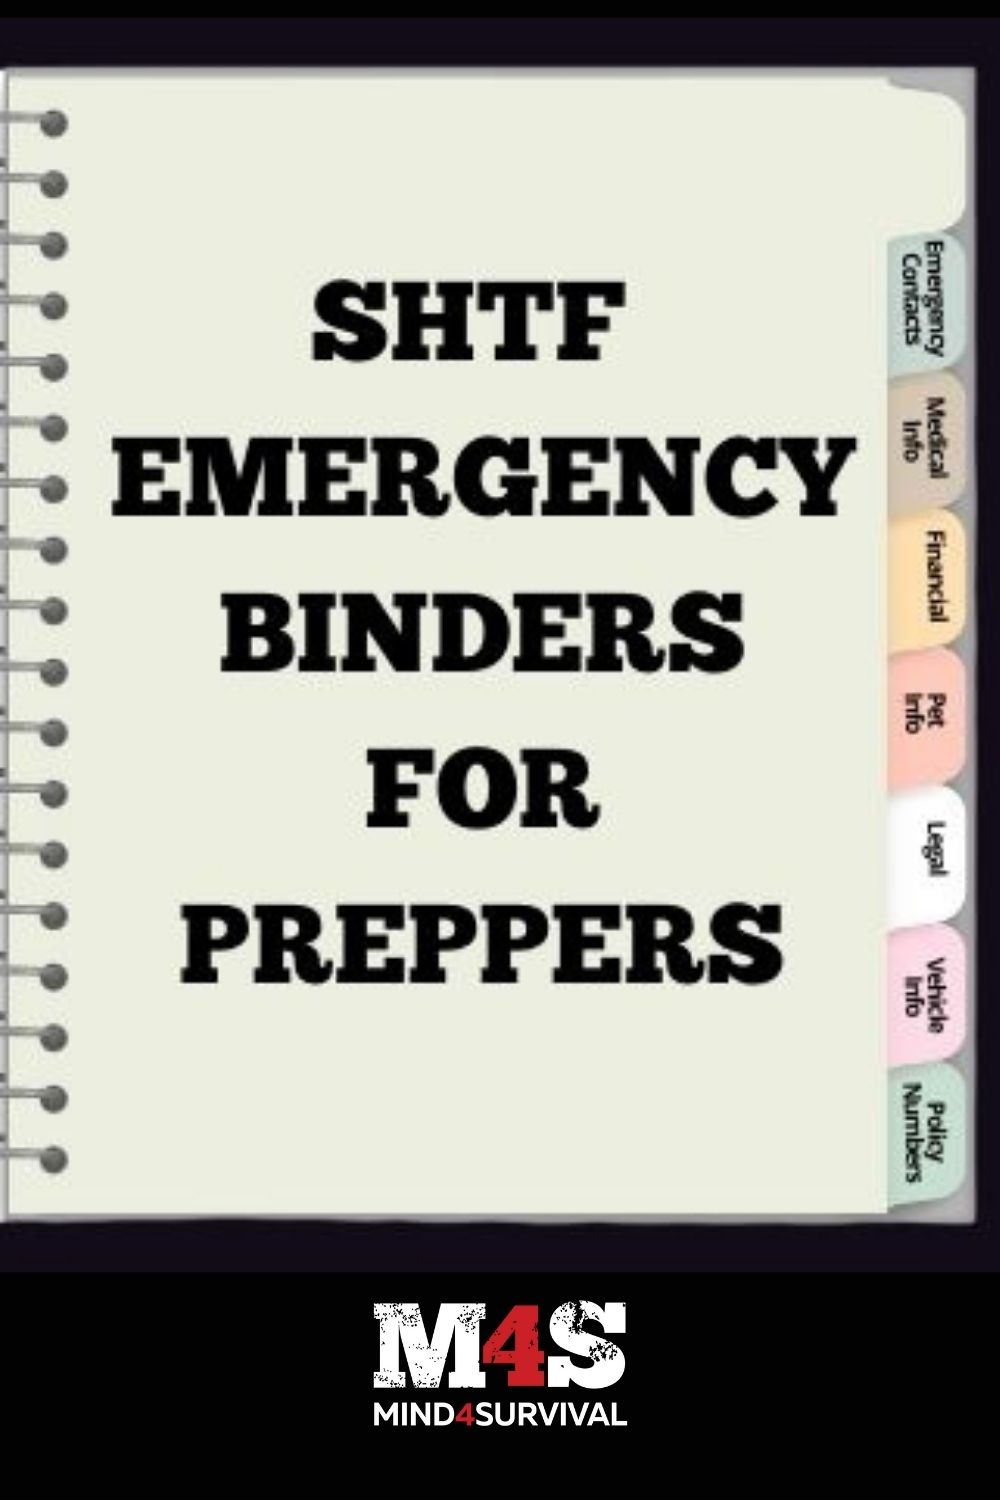 Emergency Binders: What Should Preppers Put in Them?